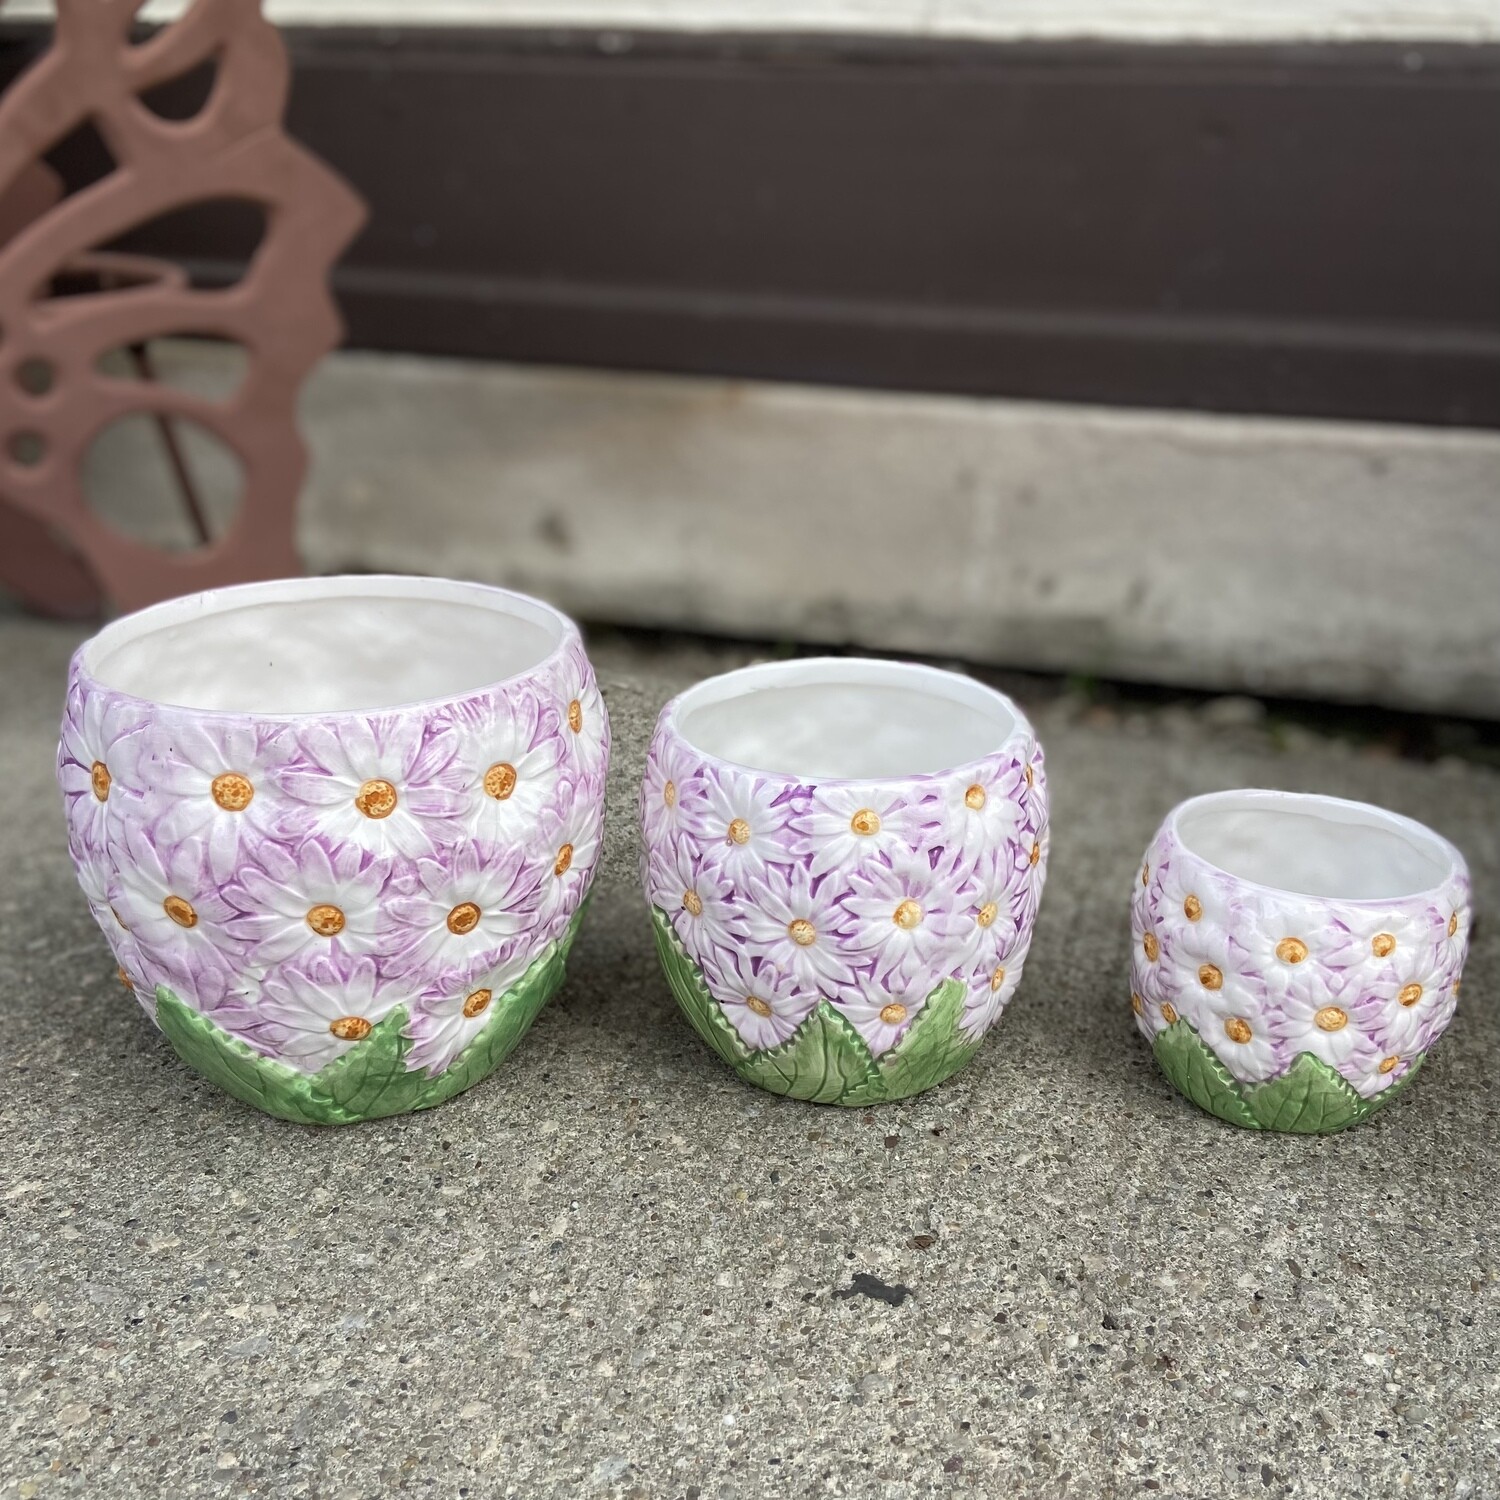 Enesco Set of 3 Pink and White Flower Graduated Ceramic Pots